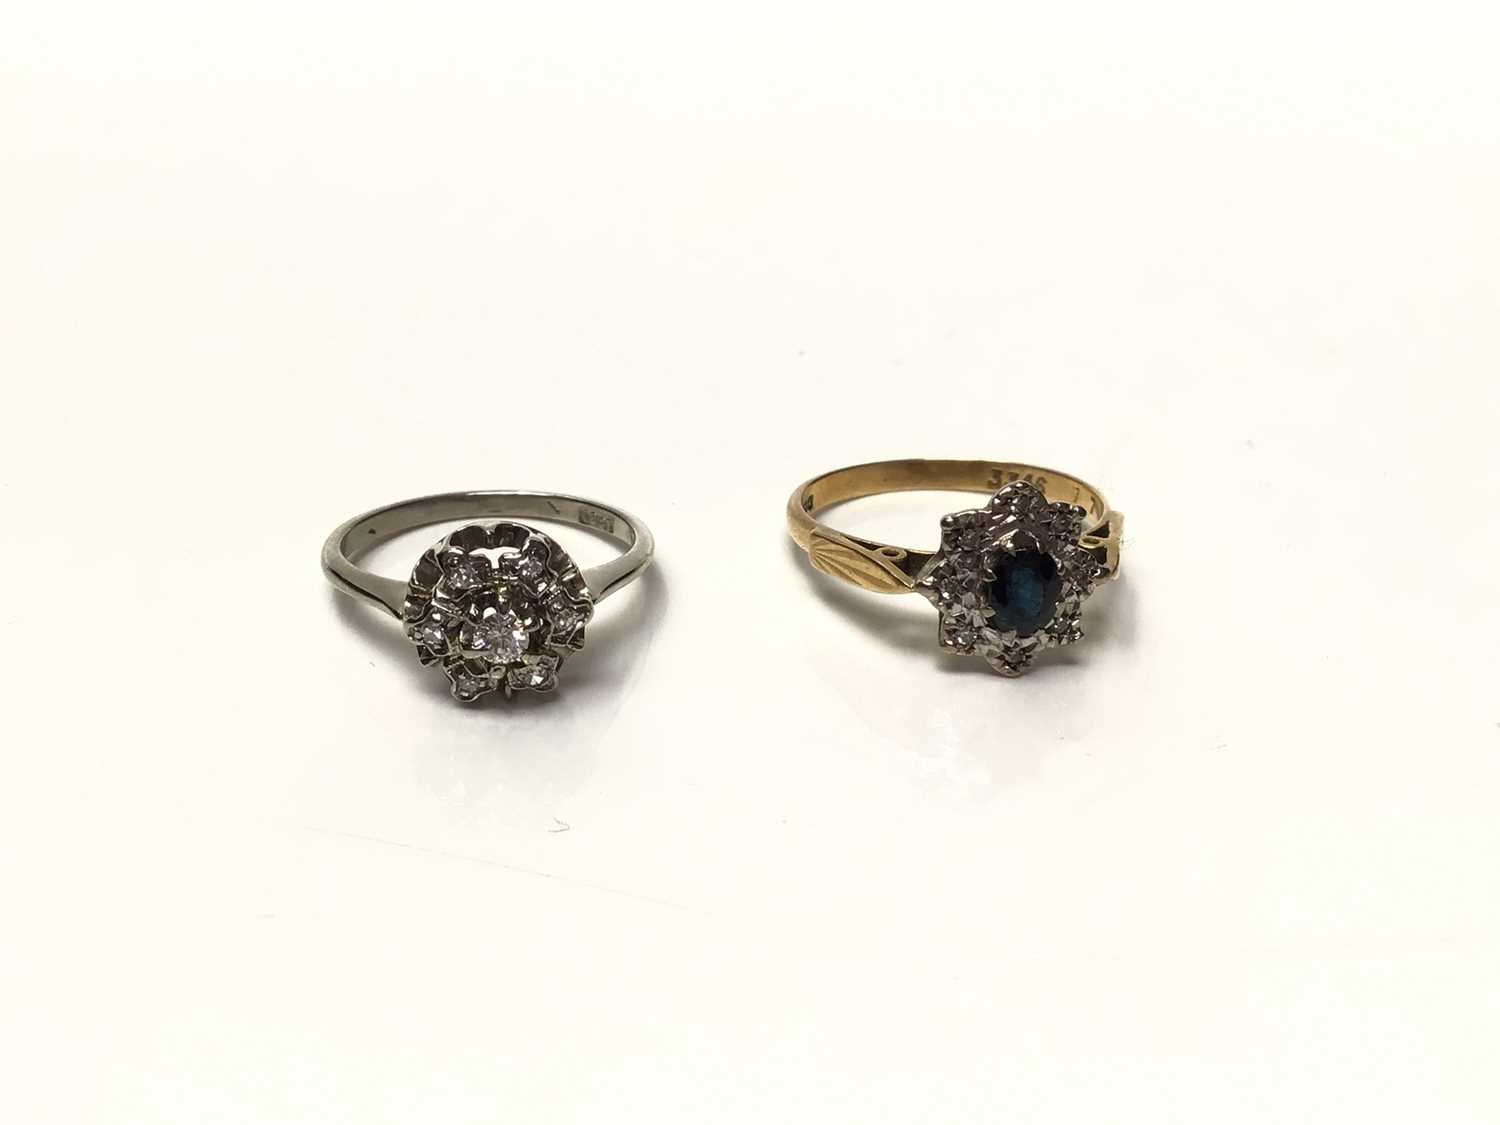 Lot 107 - 18ct white gold diamond cluster ring and 18ct yellow gold sapphire and diamond cluster ring